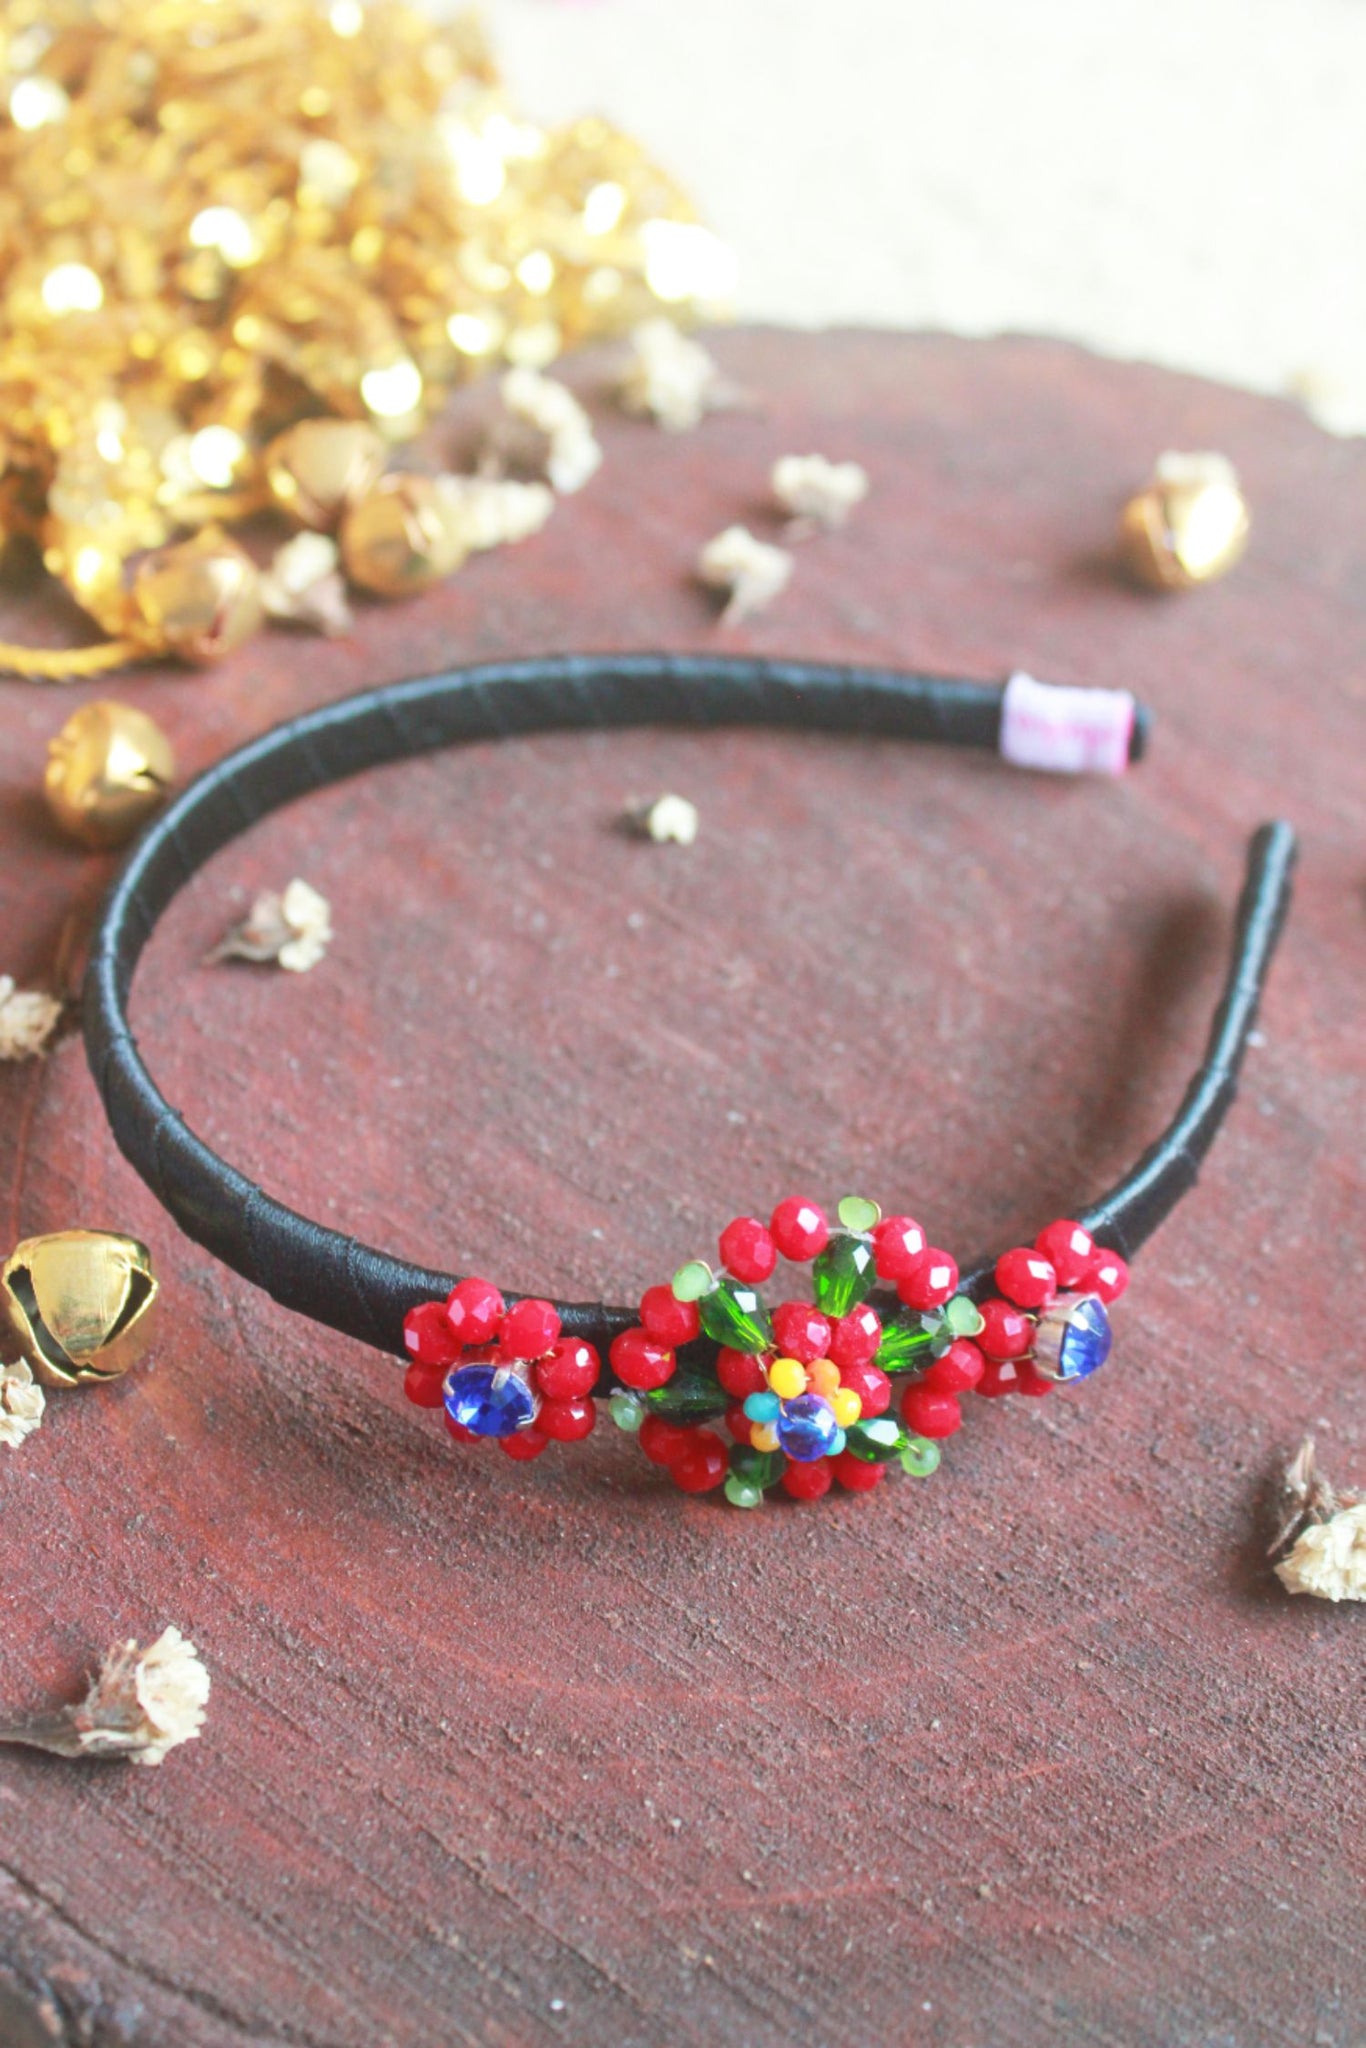 Choko Flowers From Santa Beads And Pearl Embellished Christmas Hairband Red Black Green Blue